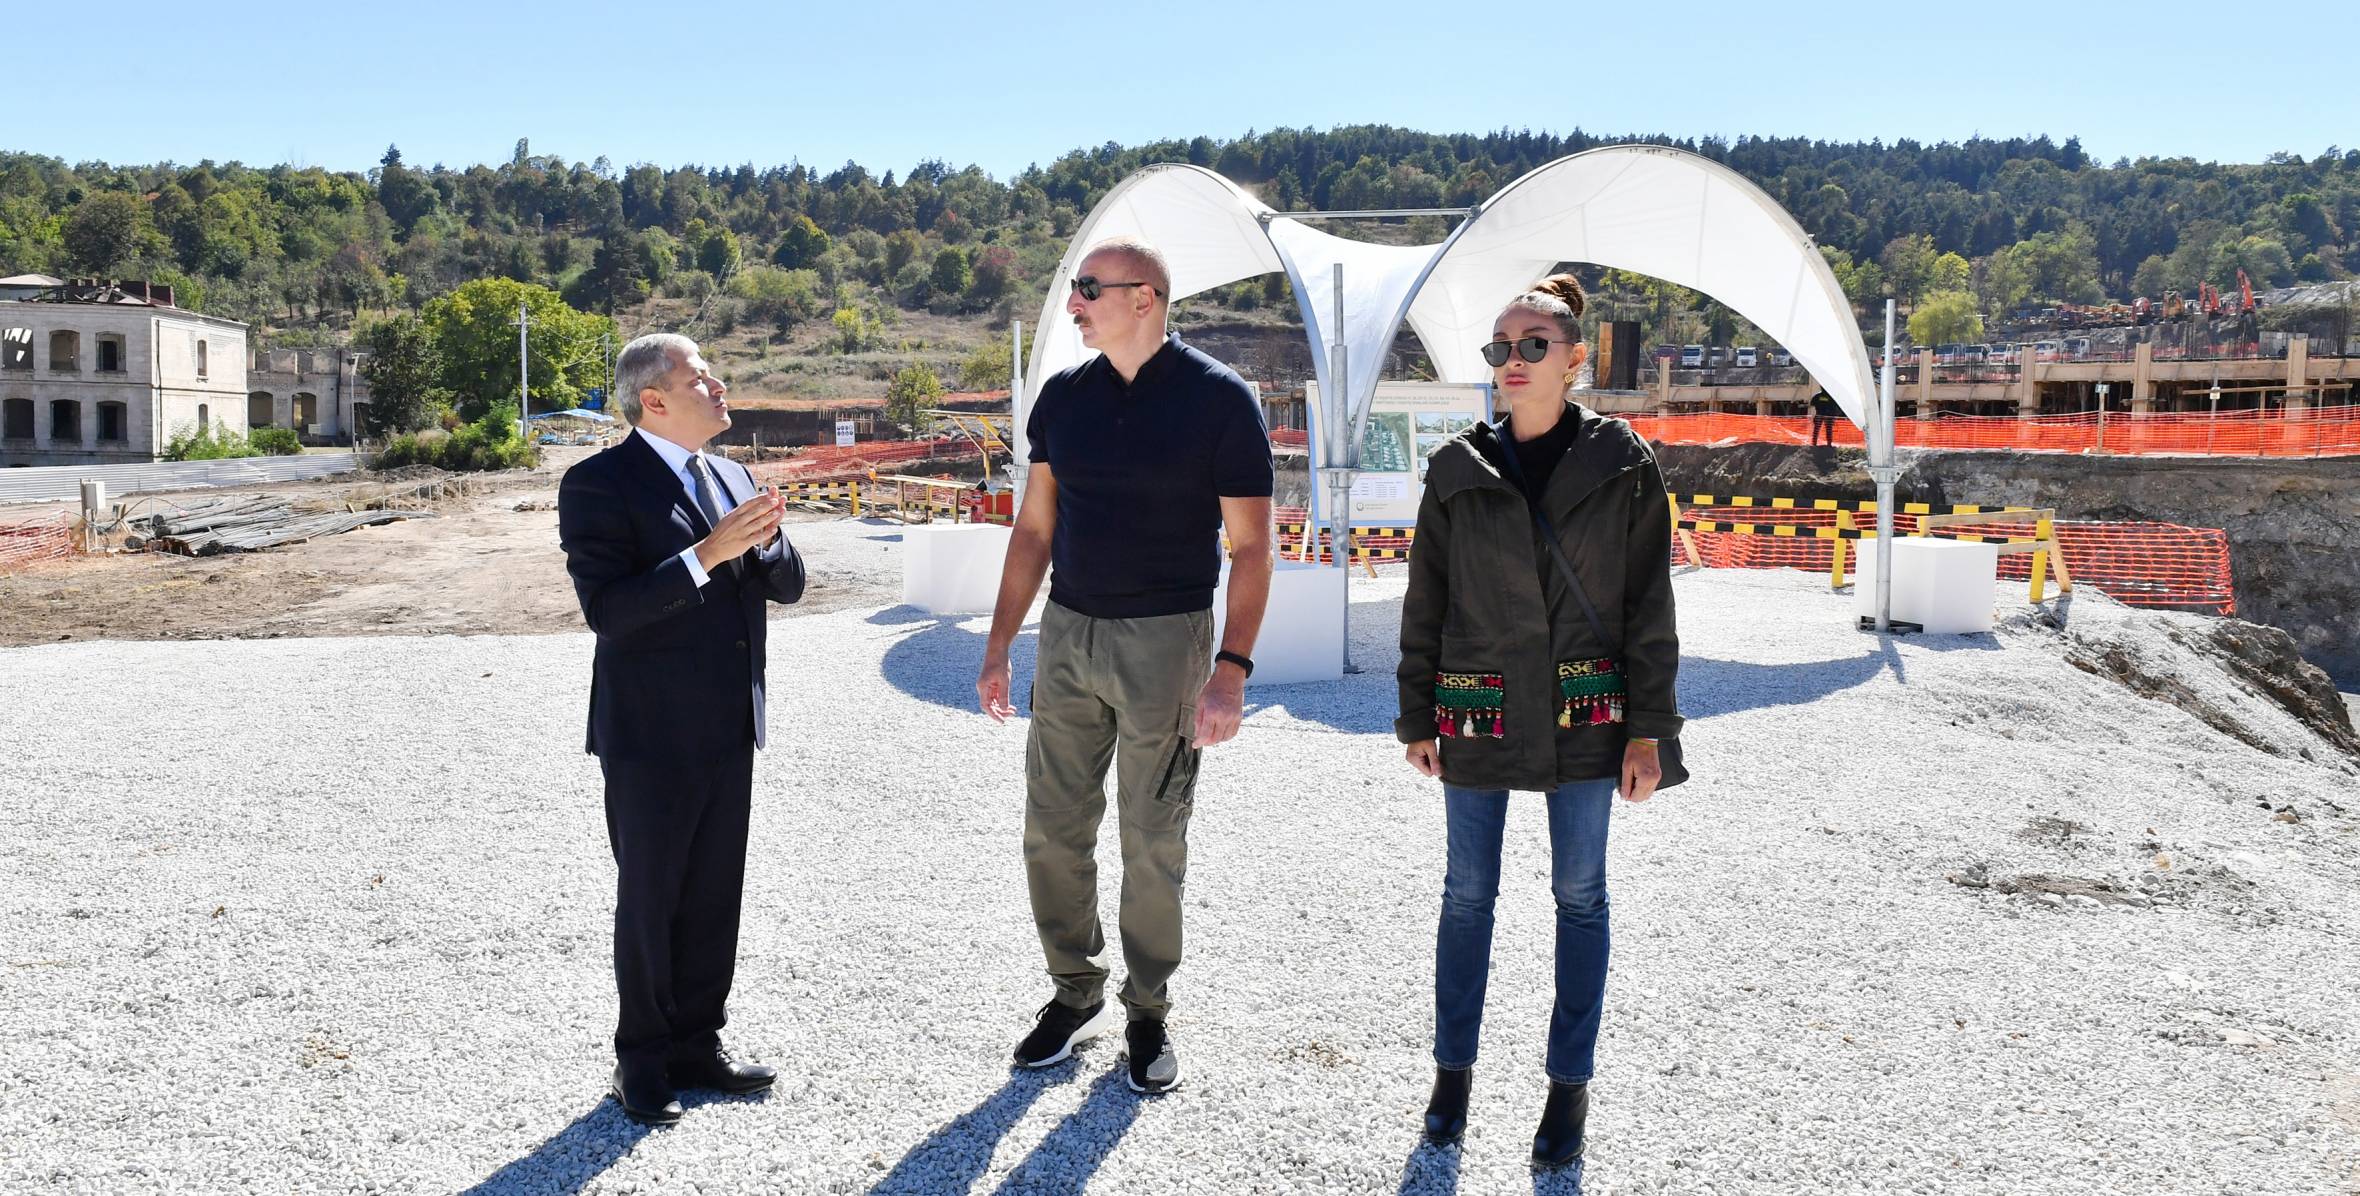 Ilham Aliyev and First Lady Mehriban Aliyeva viewed construction progress at new residential complex in Shusha